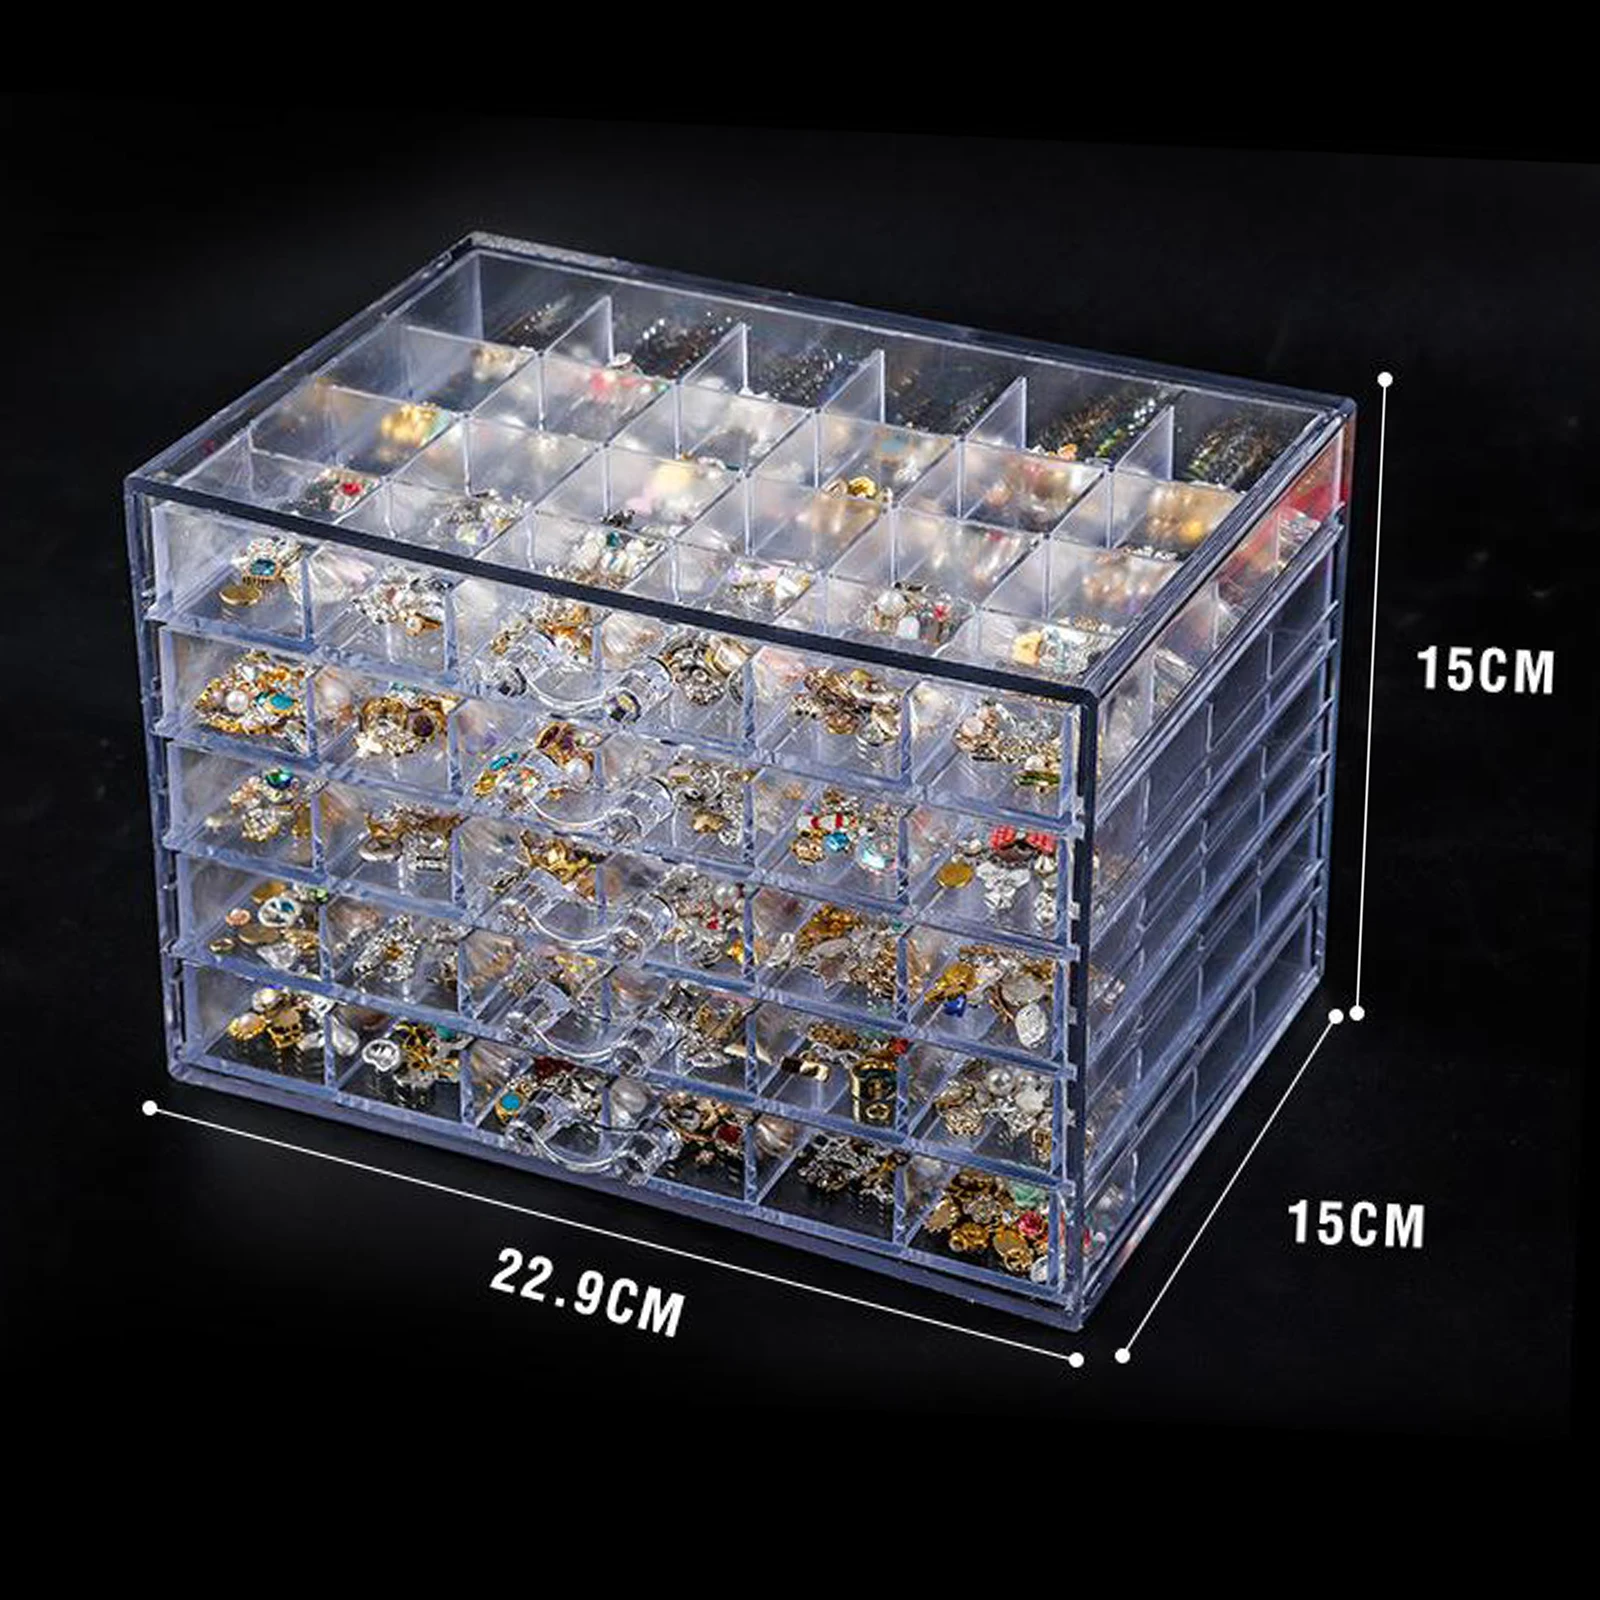 Acrylic 120-Slot Nail Art Accessories Tools Storage Container Case DIY Craft Jewelry Bead Paintings Container Organizer 